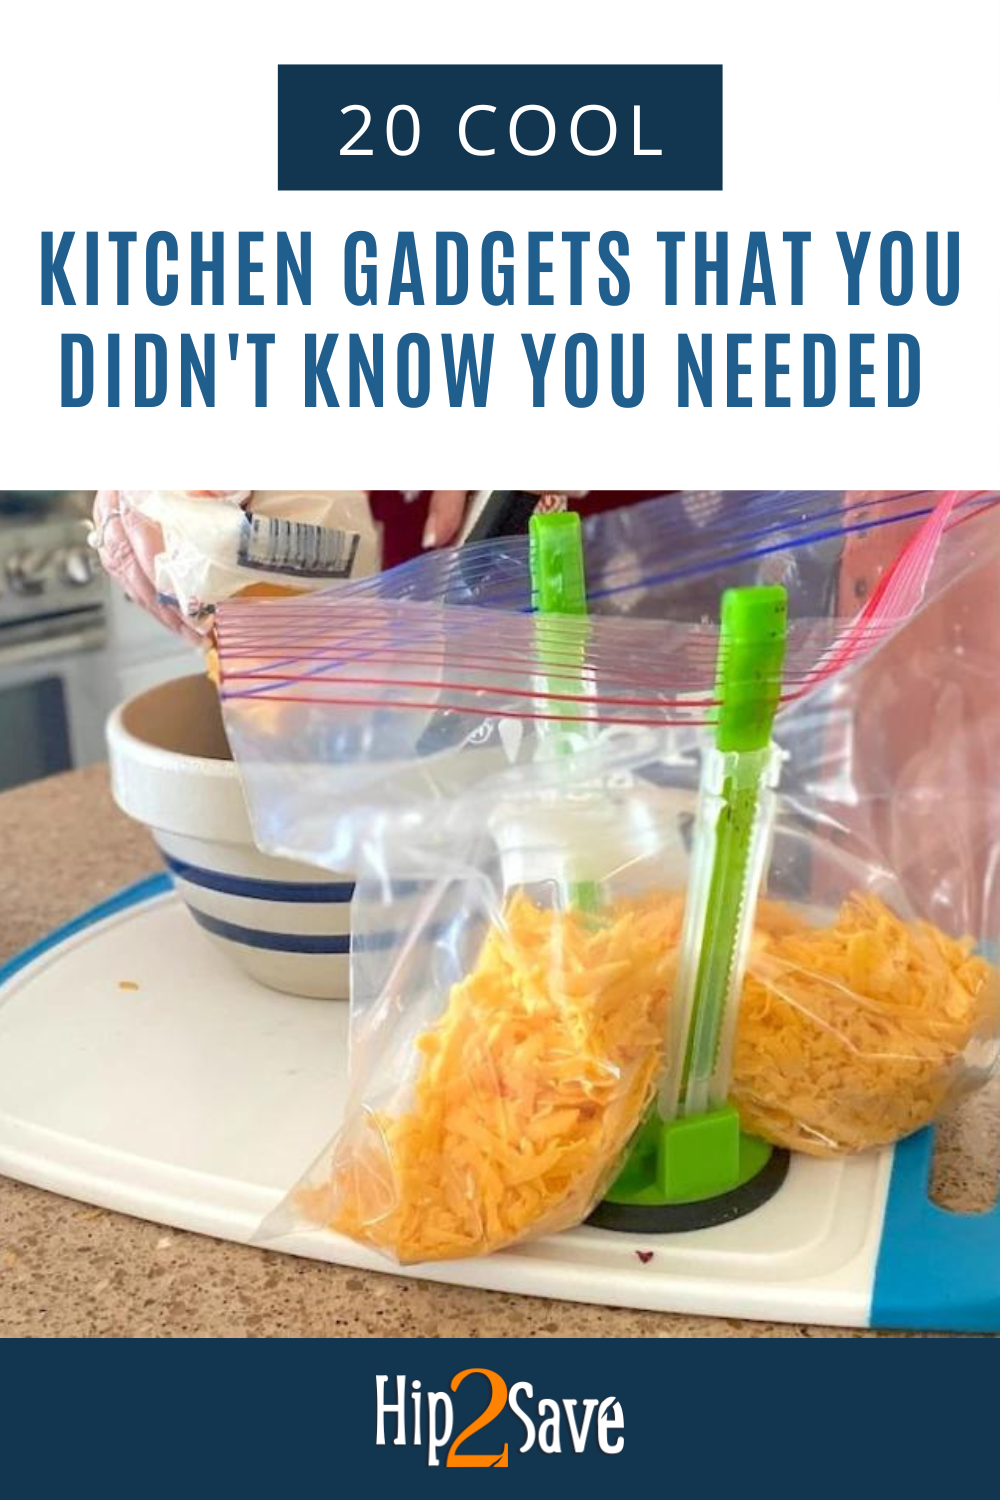 This Handy Gadget Is the Kitchen Essential You Didn't Know You